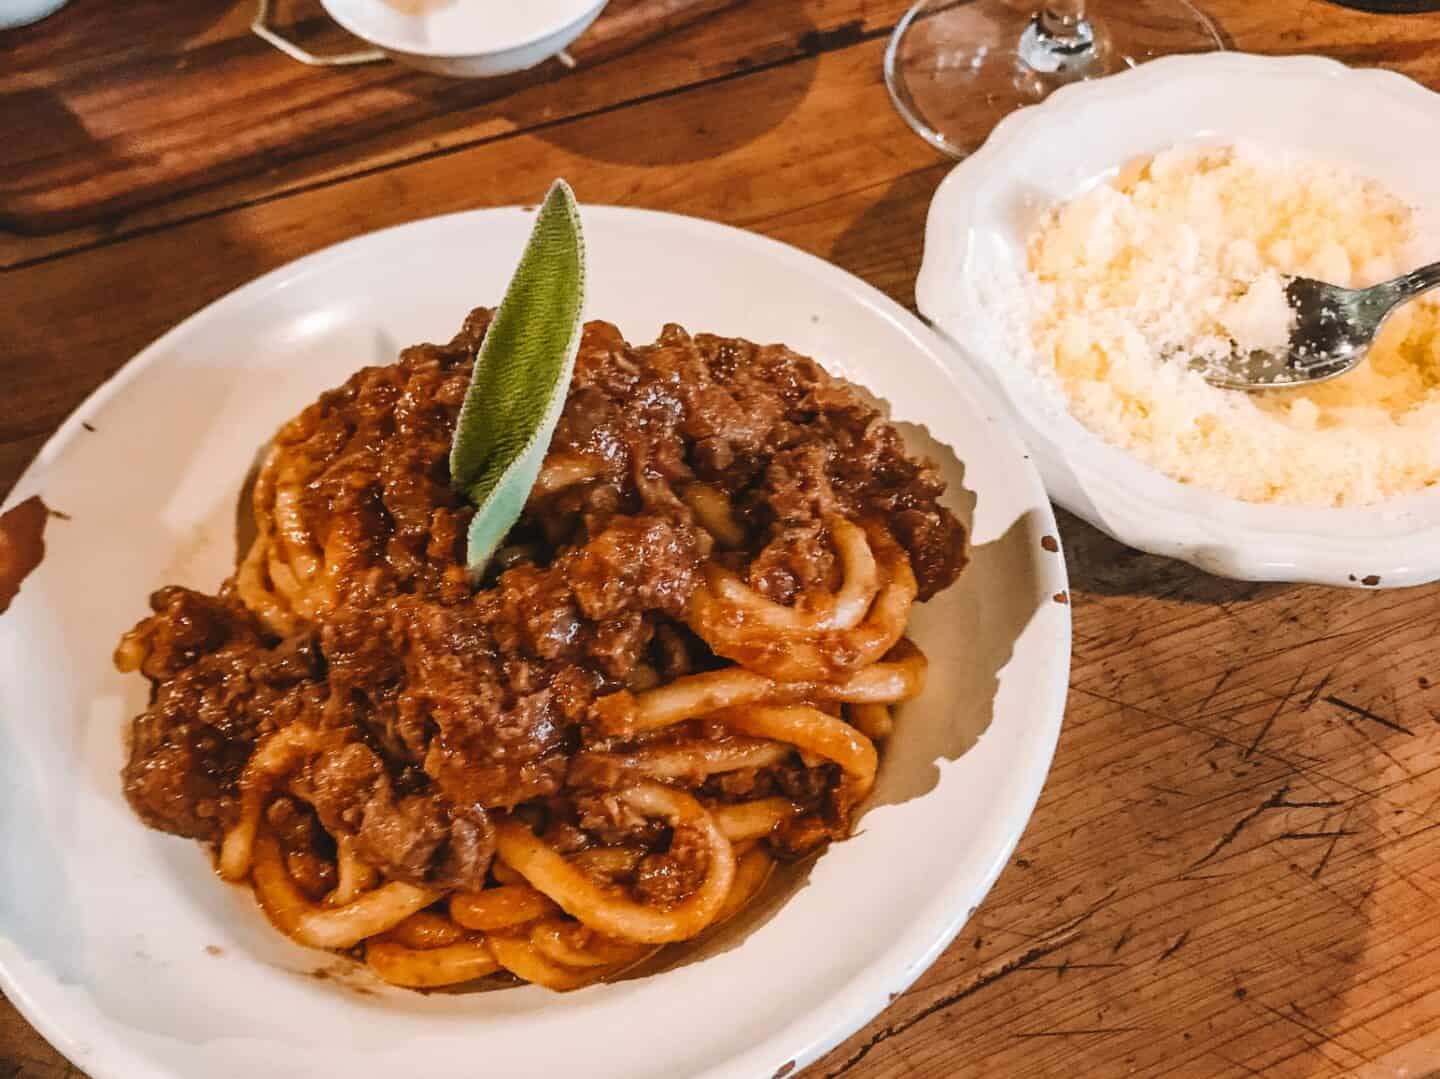 Pici pasta with boar is a typical Florentine dish 